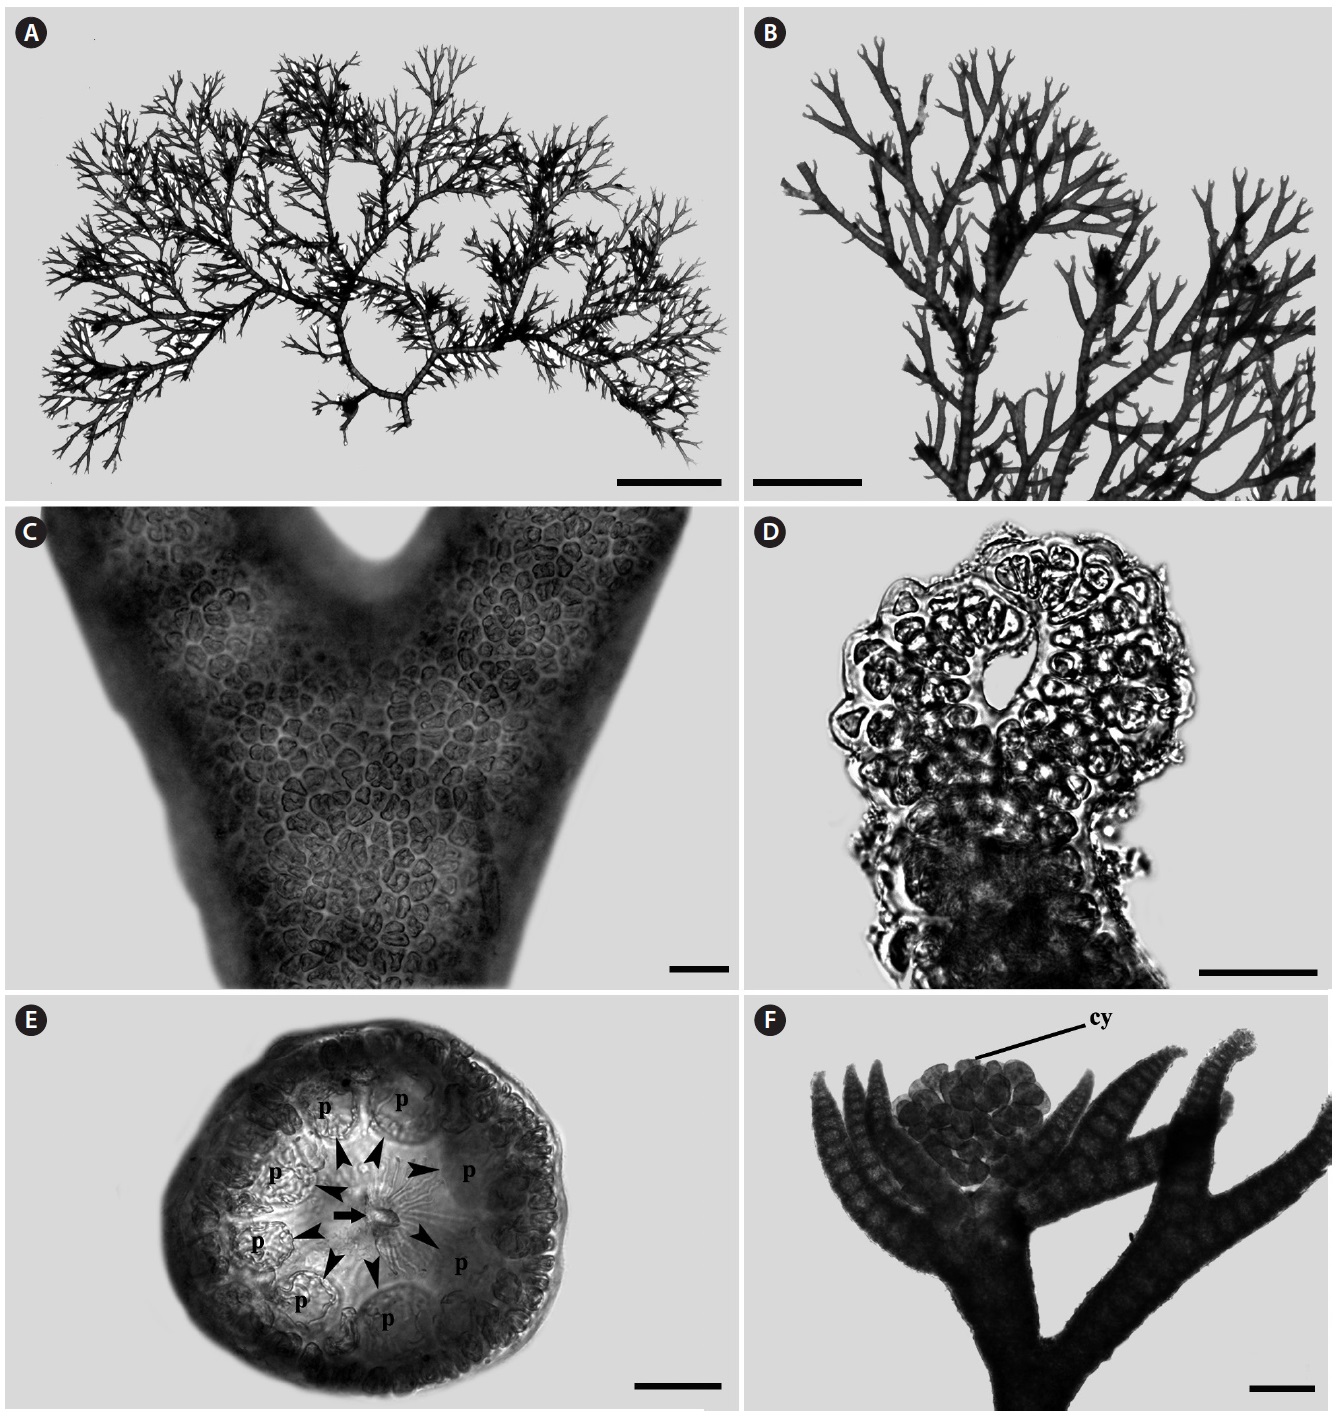 Ceramium pacificum from Jumunjin, Korea. (A) Female plant with numerous branchlets. (B) Details of branches. (C) Branching point with complete
cortication. (D) Apical region. (E) Axial cell (arrow) with 7-8 pericentral cells (arrowheads, p) in transverse section. (F) Mature cystocarp (cy). Scale bars
represent: A, 5 mm; B, 2 mm; C, 30 μm; D, E, 40 μm; F, 200 μm.